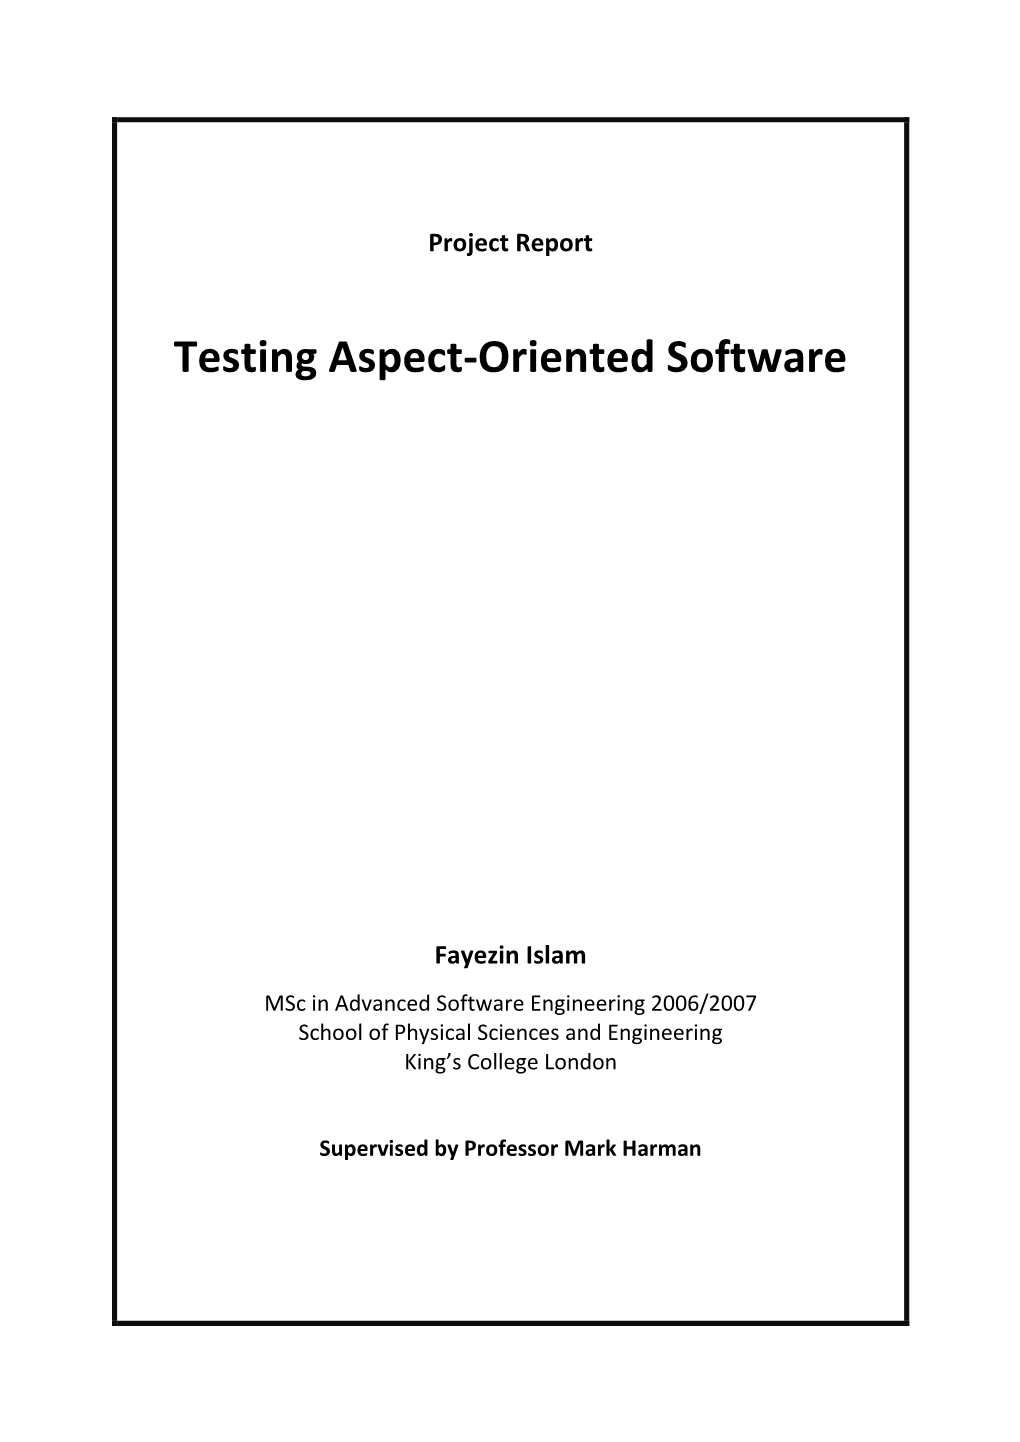 Testing Aspect-Oriented Software